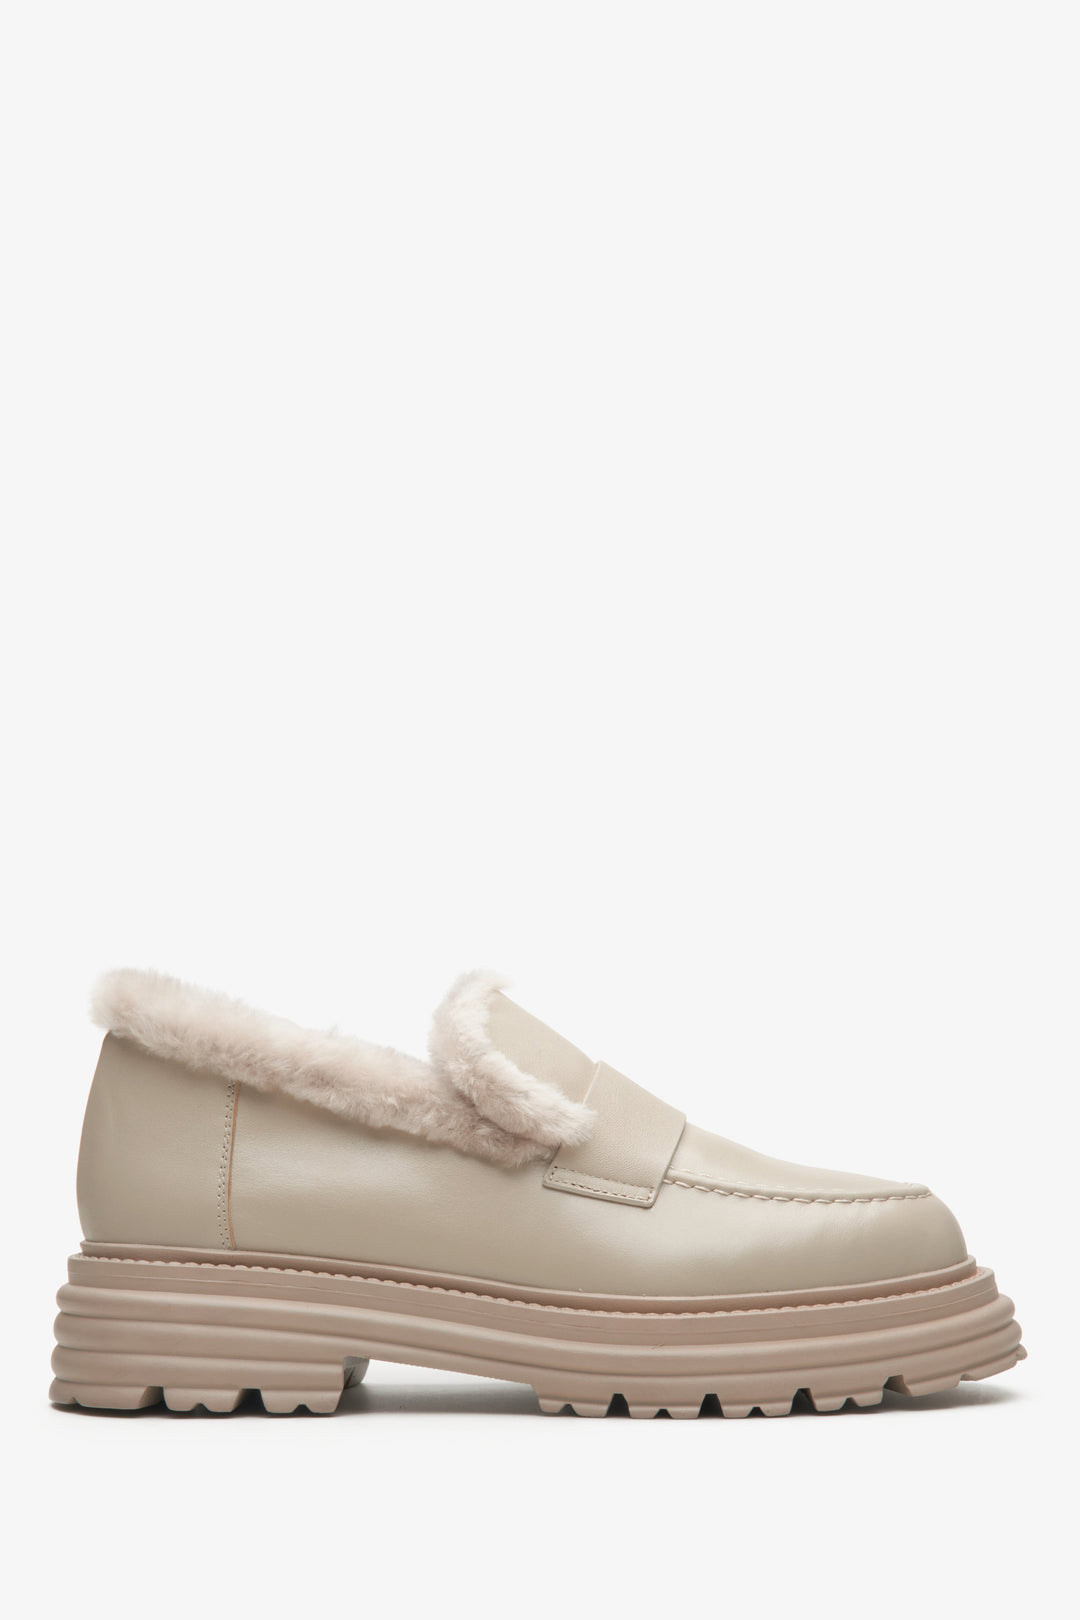 Women's Beige Winter Moccasins made of Genuine Leather and Fur Estro ER00114214.